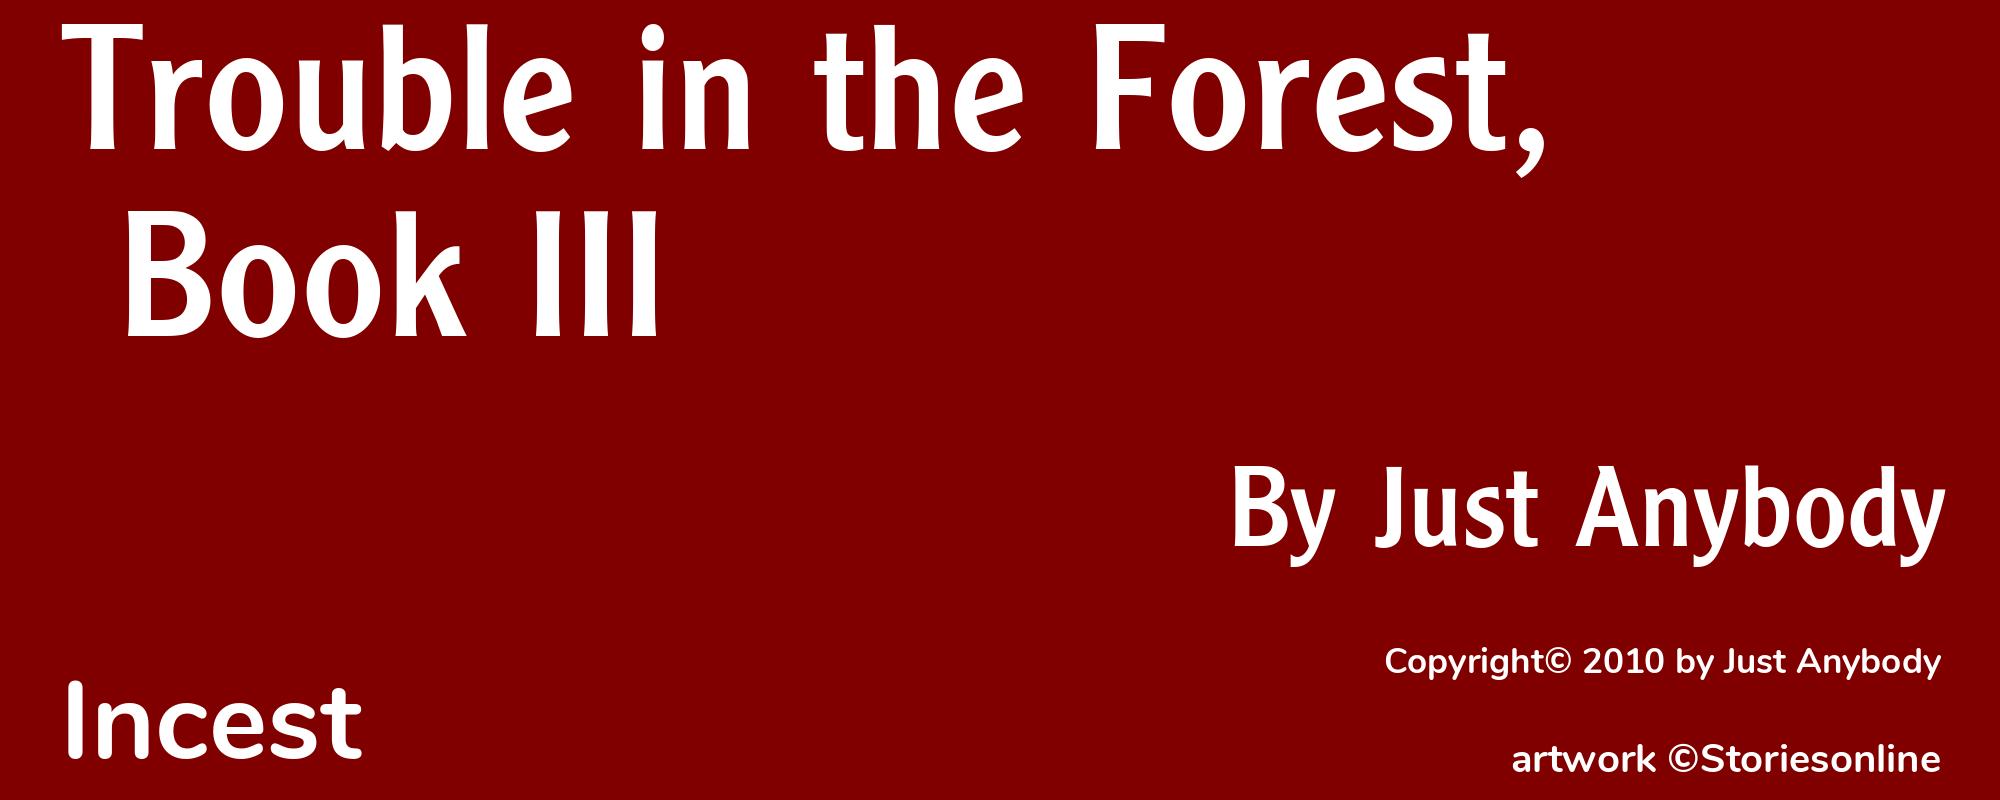 Trouble in the Forest, Book III - Cover